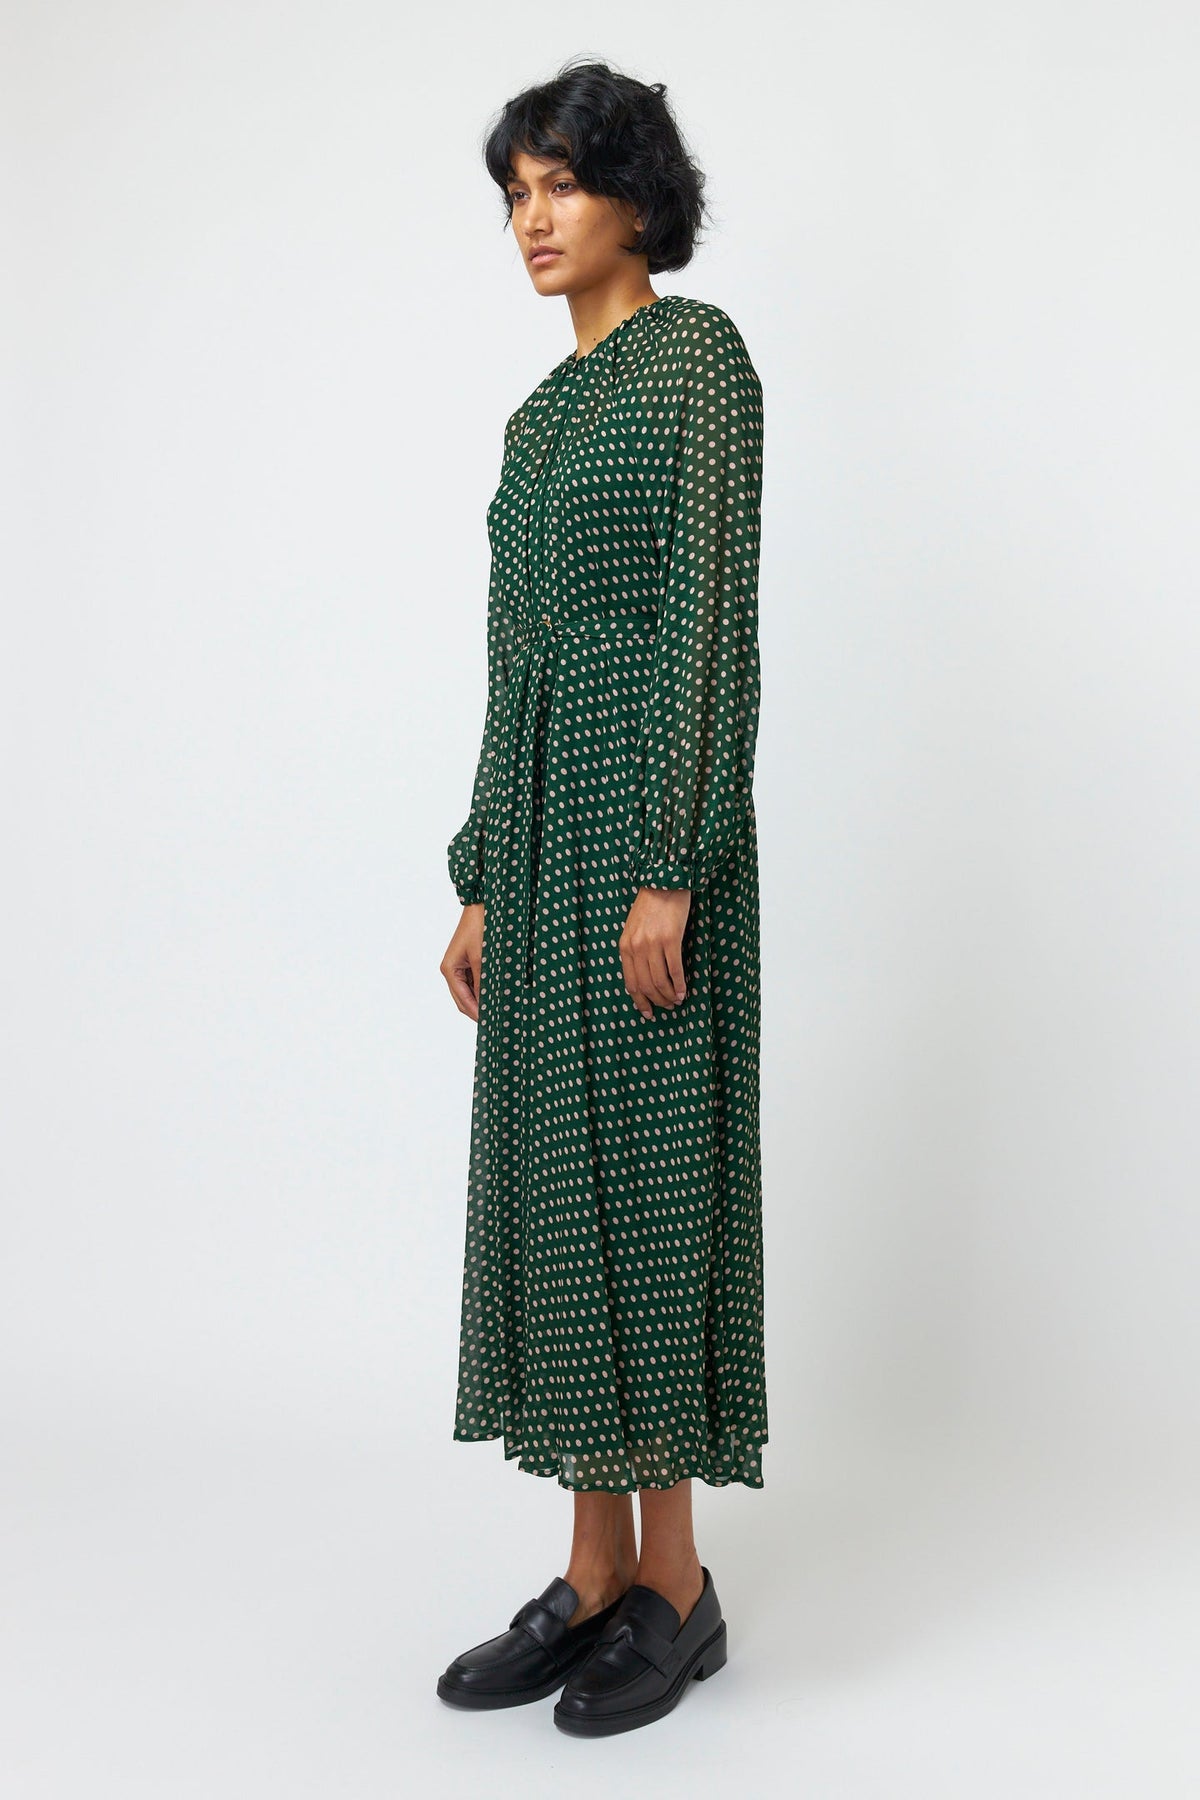 Kate Sylvester Suzanne Dress